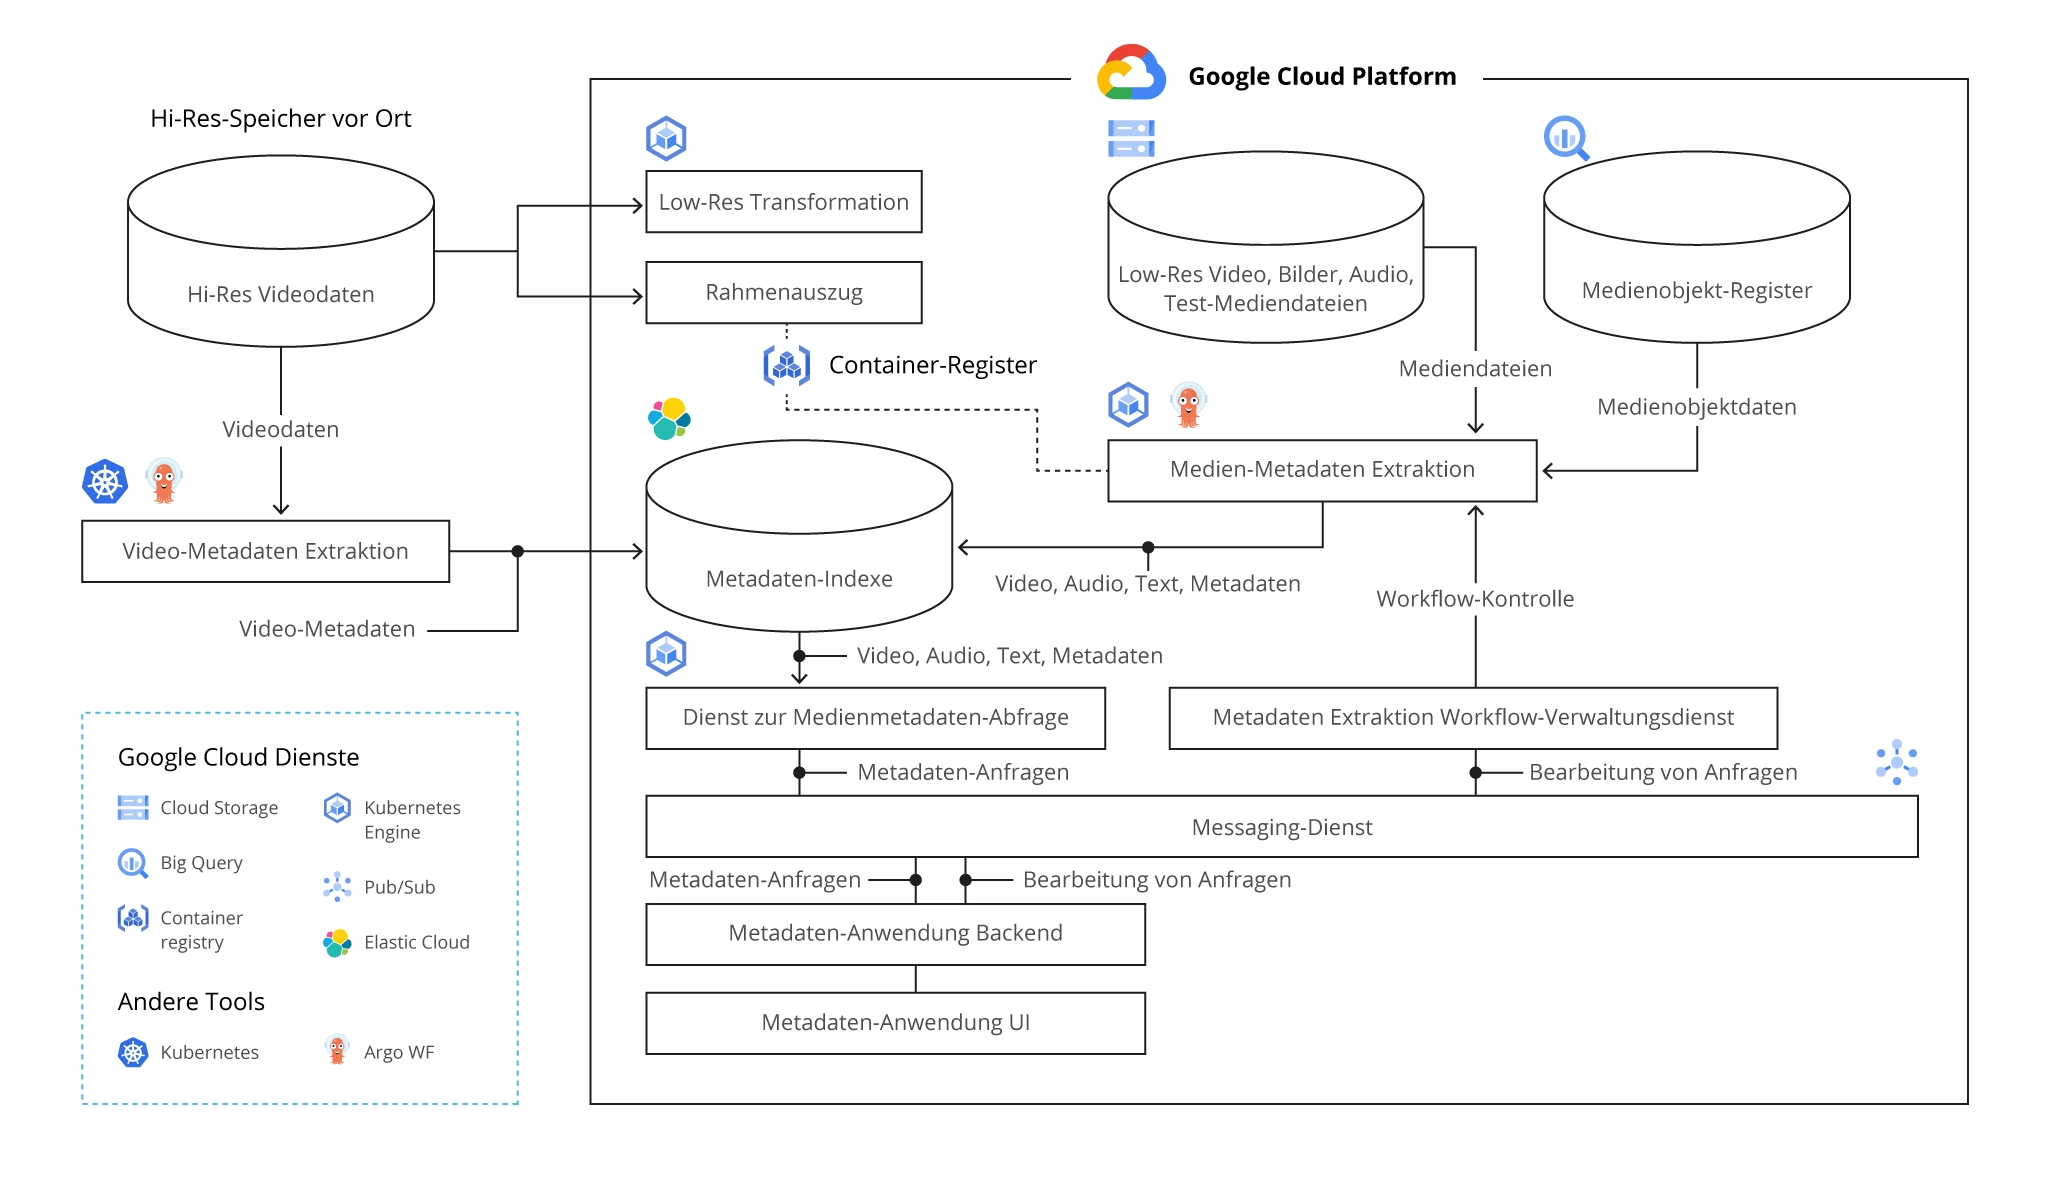 A sample of the Architecture of a Data Platform on GCP - de